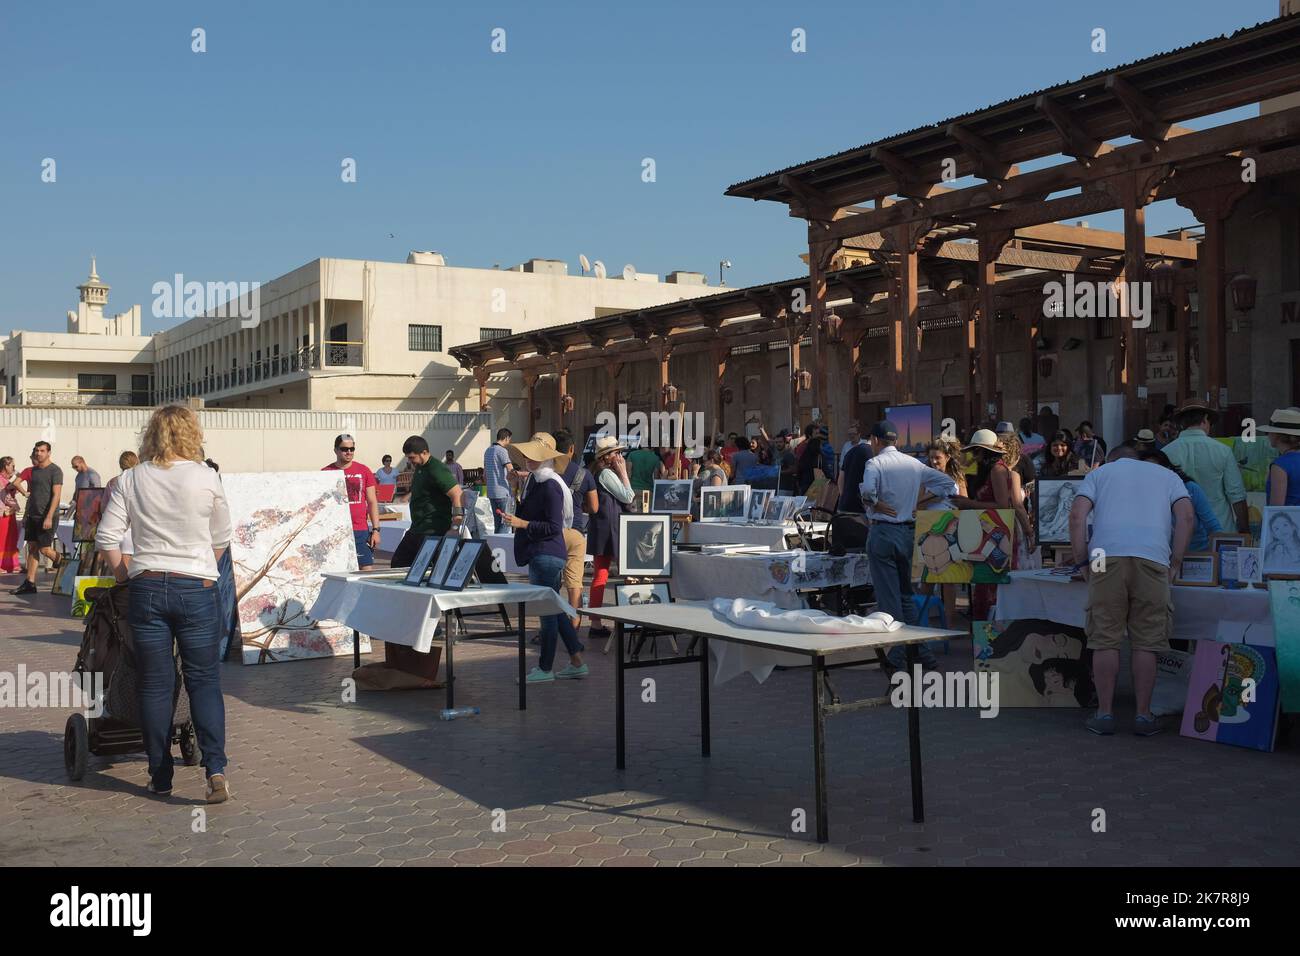 Tables with artworks from local artists at an art fair in historical Al Fahidi. Sunny outdoor event in the modern city of Dubai, United Arab Emirates. Stock Photo